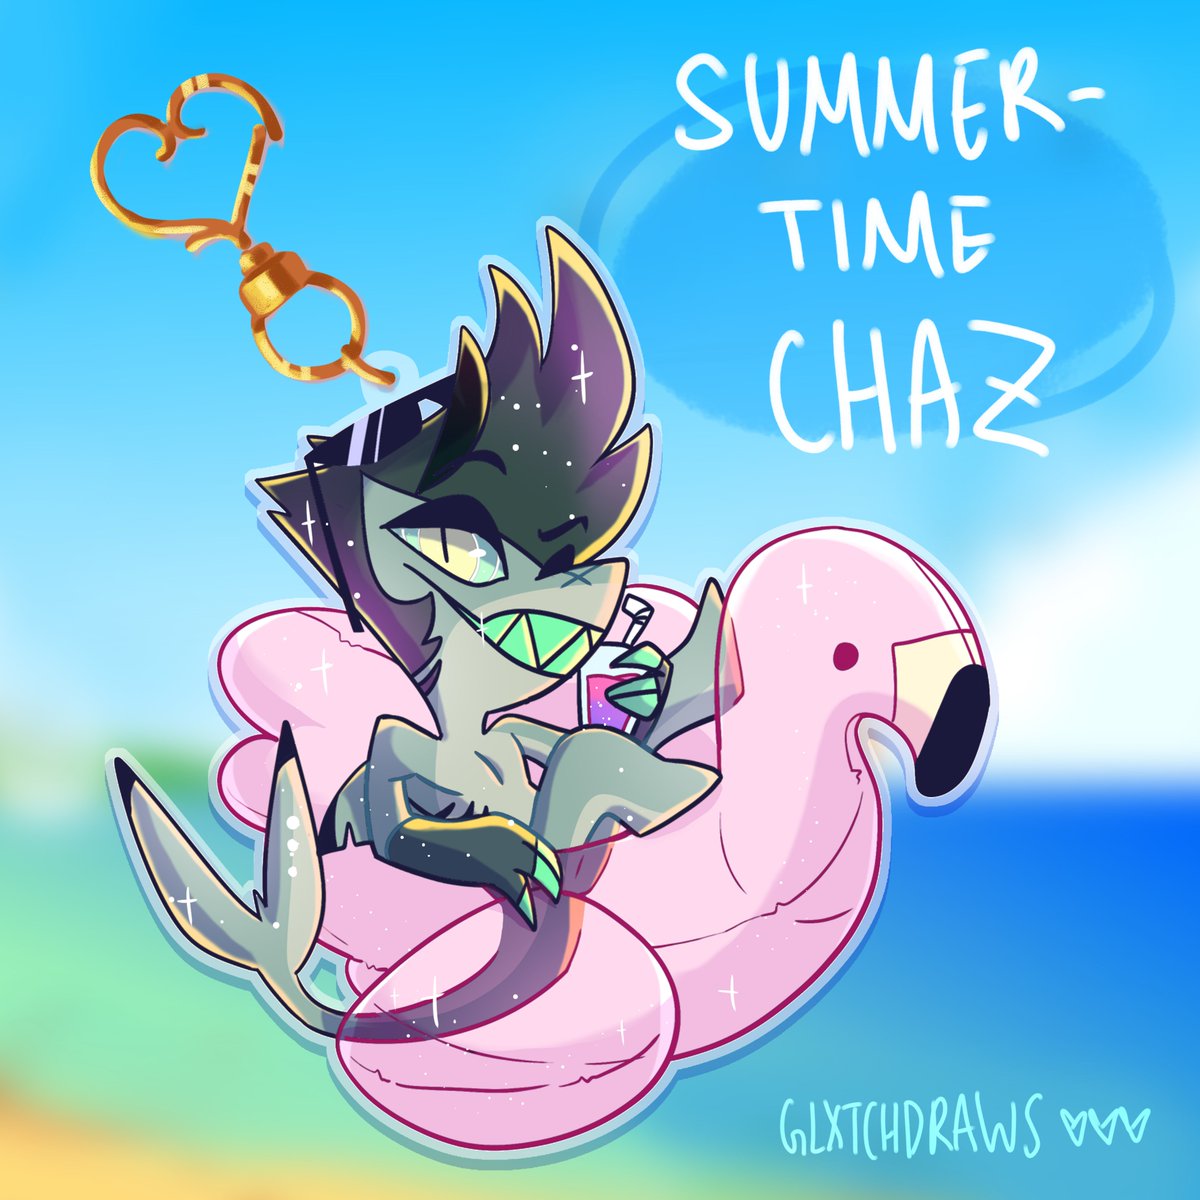 #SharkBoySummer featuring summer time #HelluvaBossChaz as a KEYCHAIN for #WhoFanarted, preorders dropping soon!! 

Chaz deserves his own line of merch AHHHHHH
#HelluvaBoss